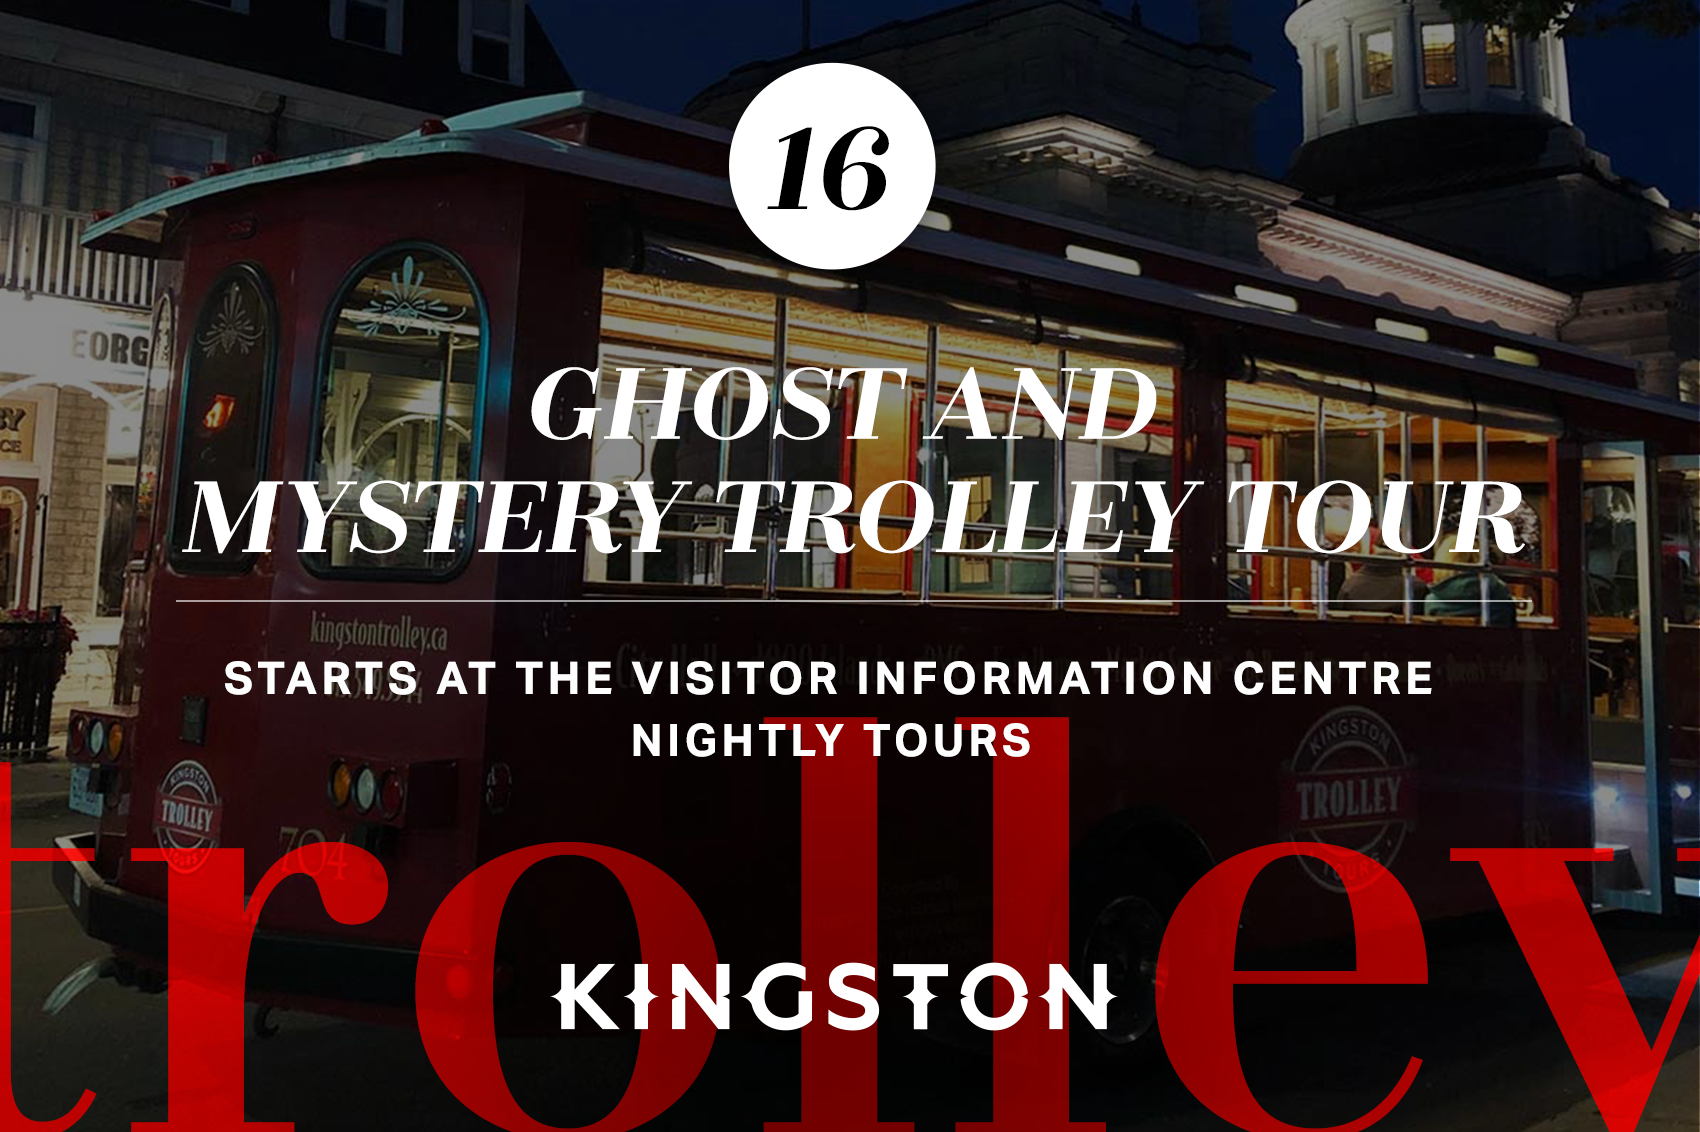 16. Ghost and Mystery Trolley Tours: Starts at the Visitor Information Centre Nightly Tours